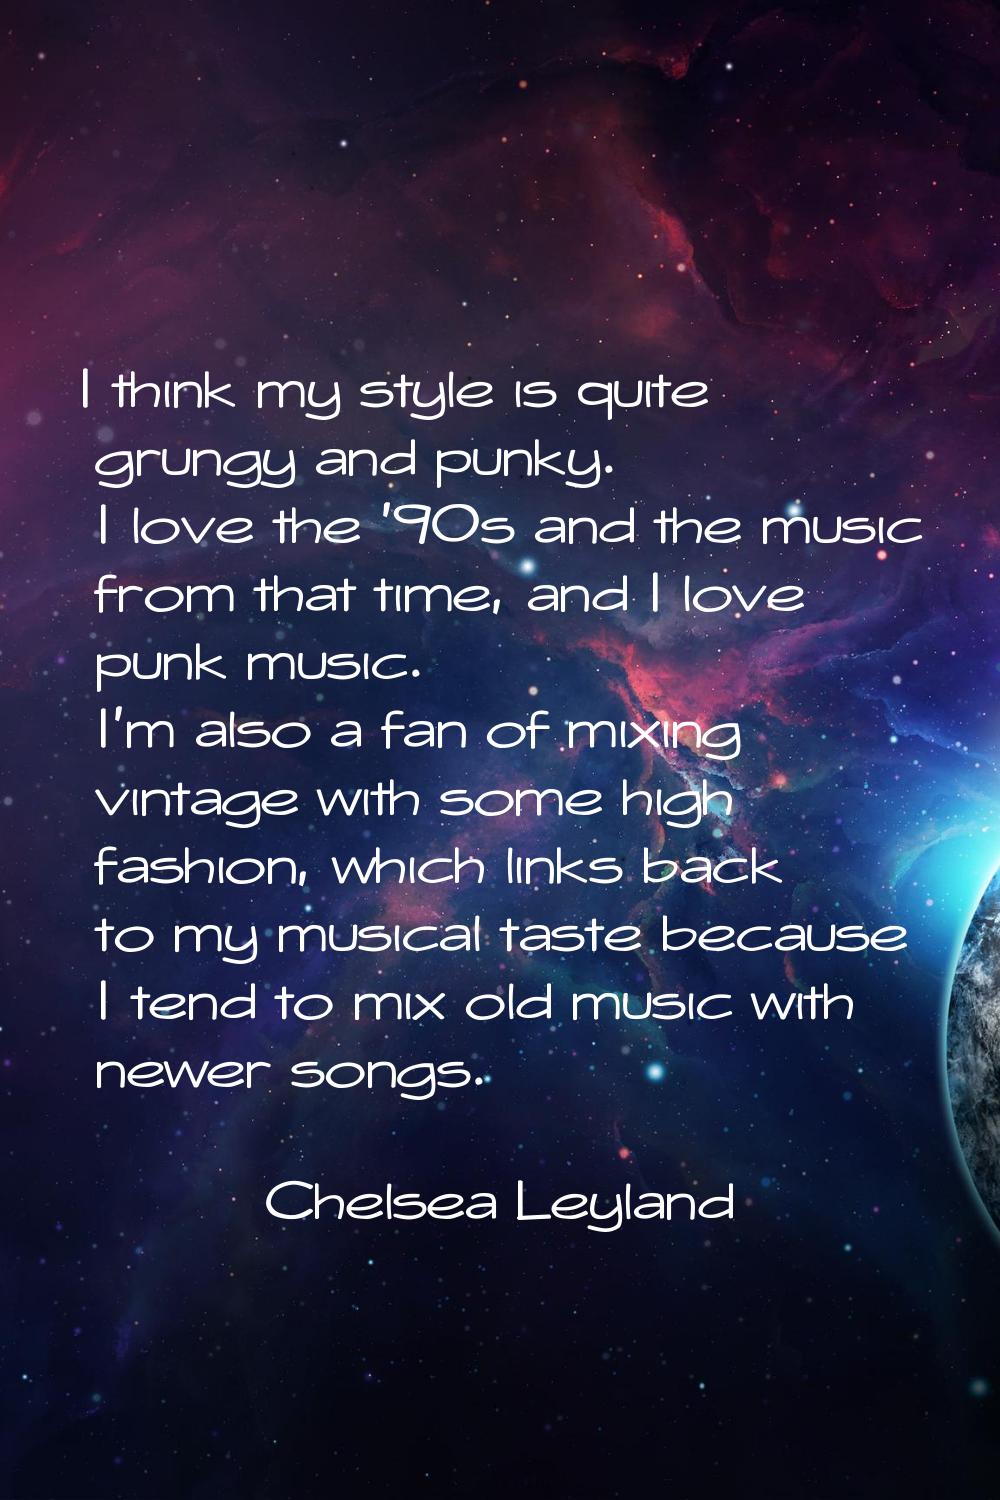 I think my style is quite grungy and punky. I love the '90s and the music from that time, and I lov